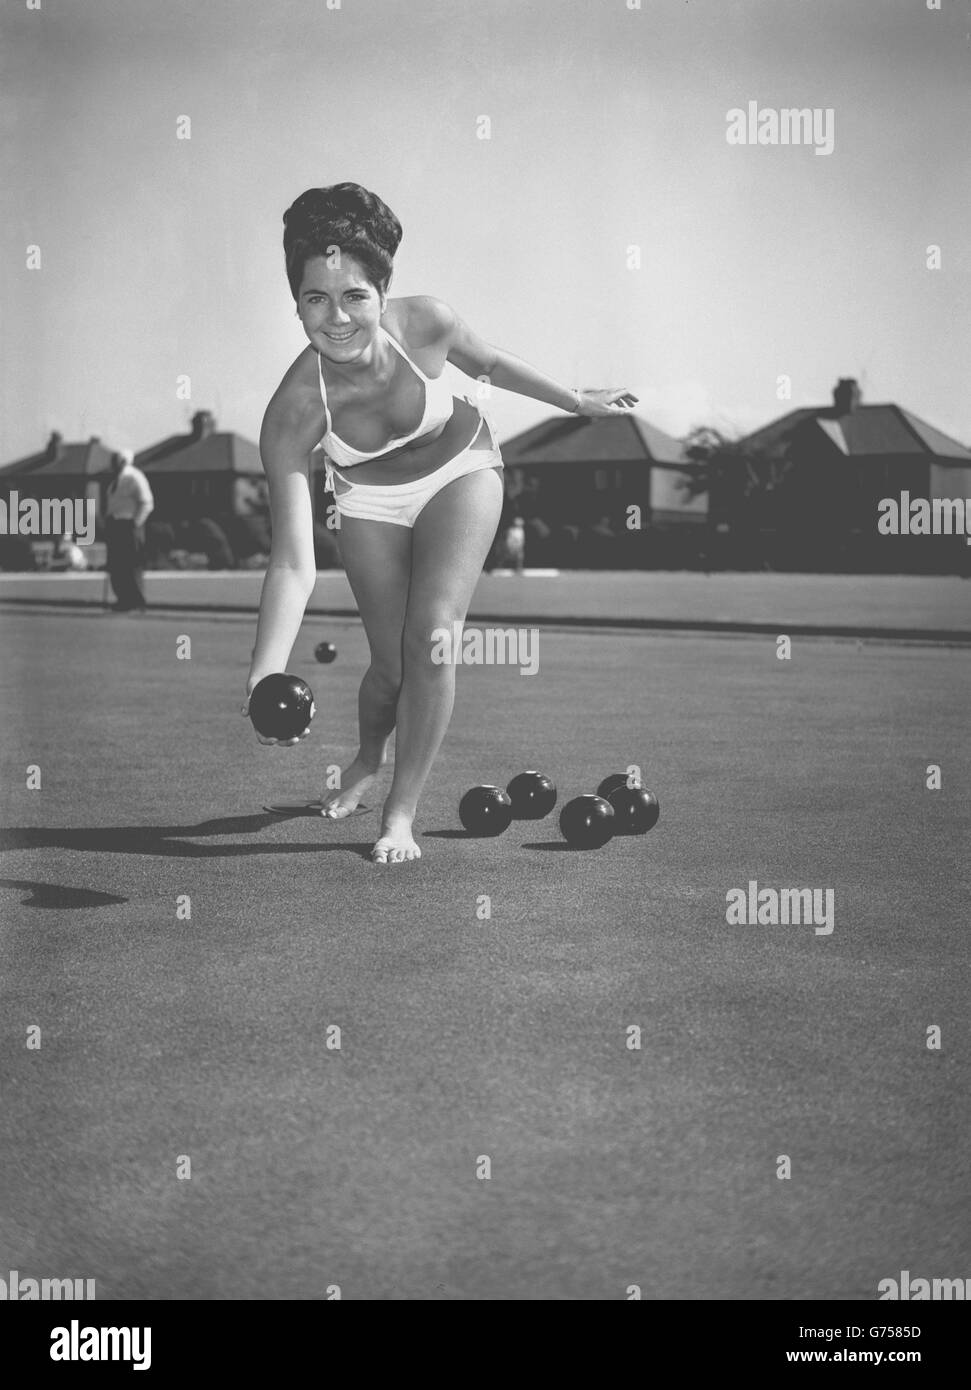 Vivienne Kendrick, 21, of Lytham St Annes, Lancashire, is not only a bathing beauty contest winner, but is also an accomplished green bowler having won her local bowling club president's handicap. Here she is practising for future bowling handicaps. Stock Photo